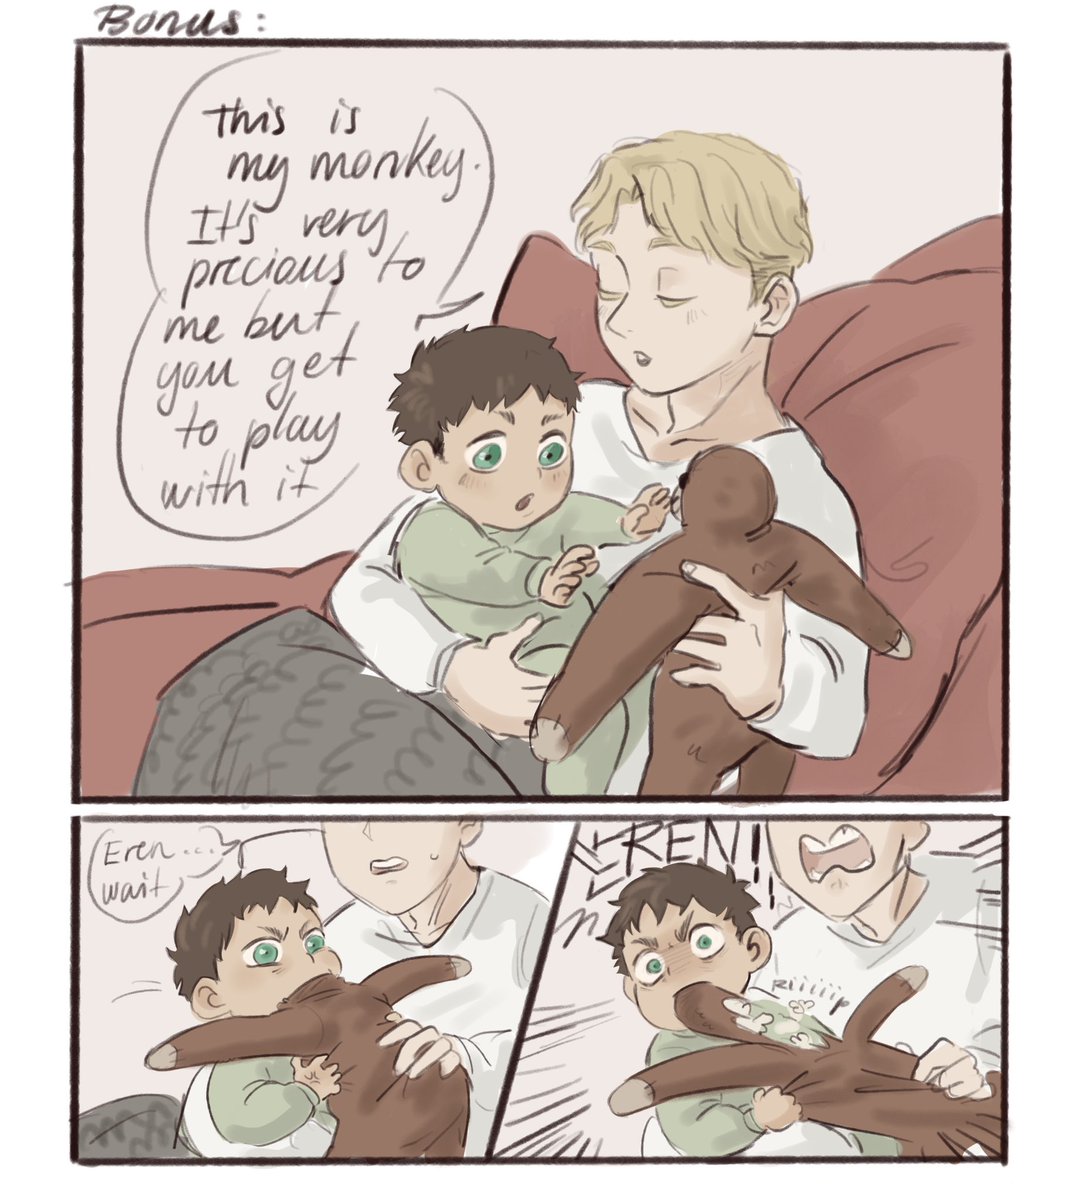 A modern AU where they are a happy enough family and little Zeke gets to meet baby Eren 